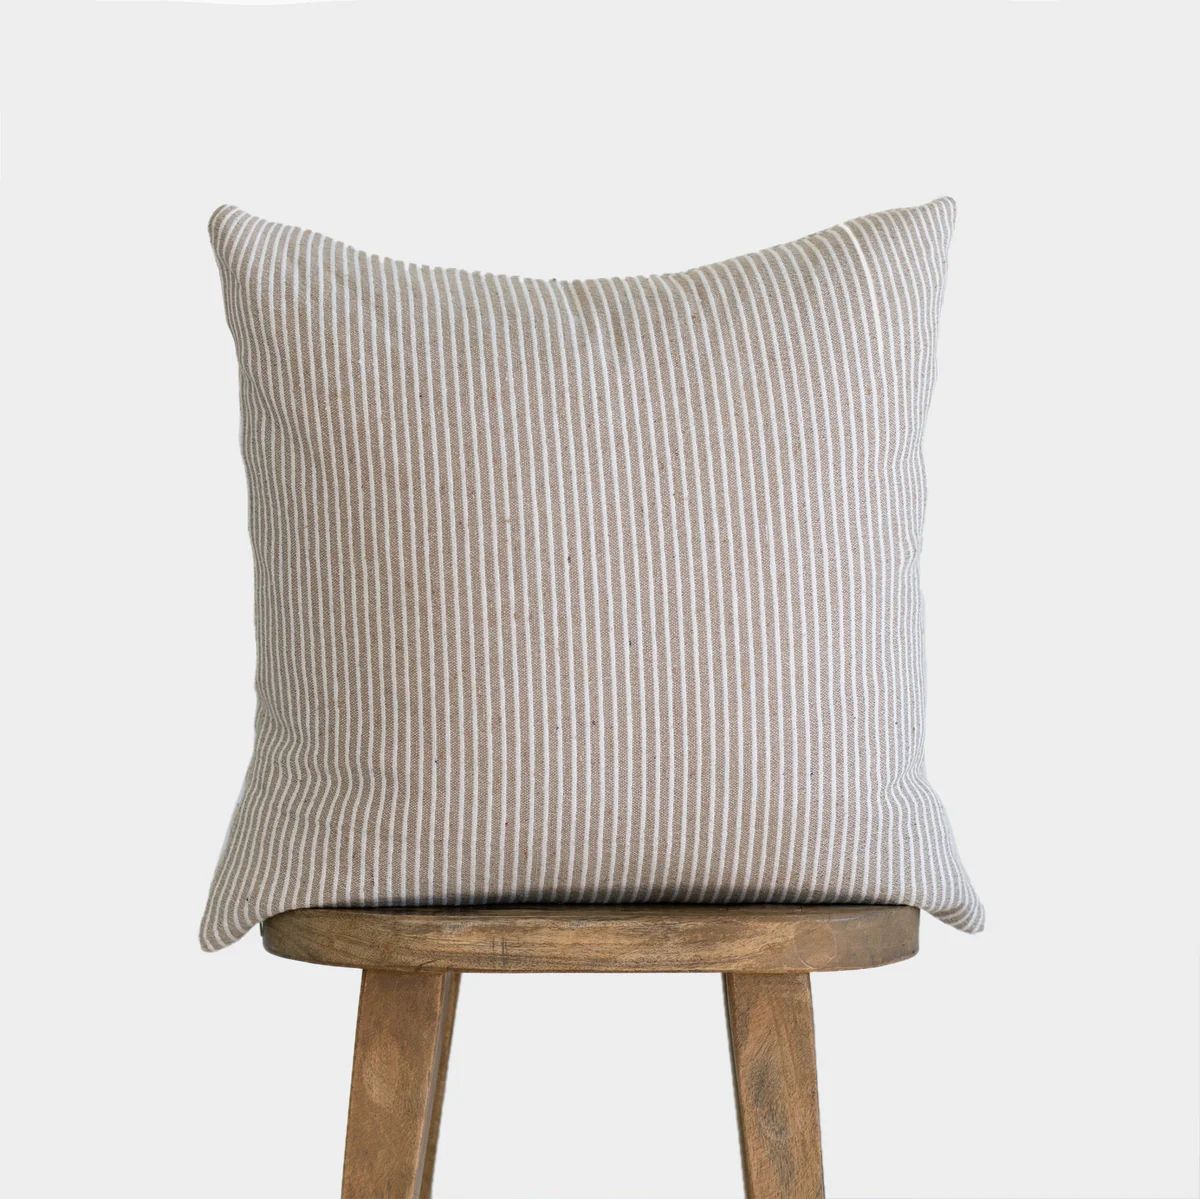 June in Tan - 18" | 22" Pillow Cover | Woven Nook